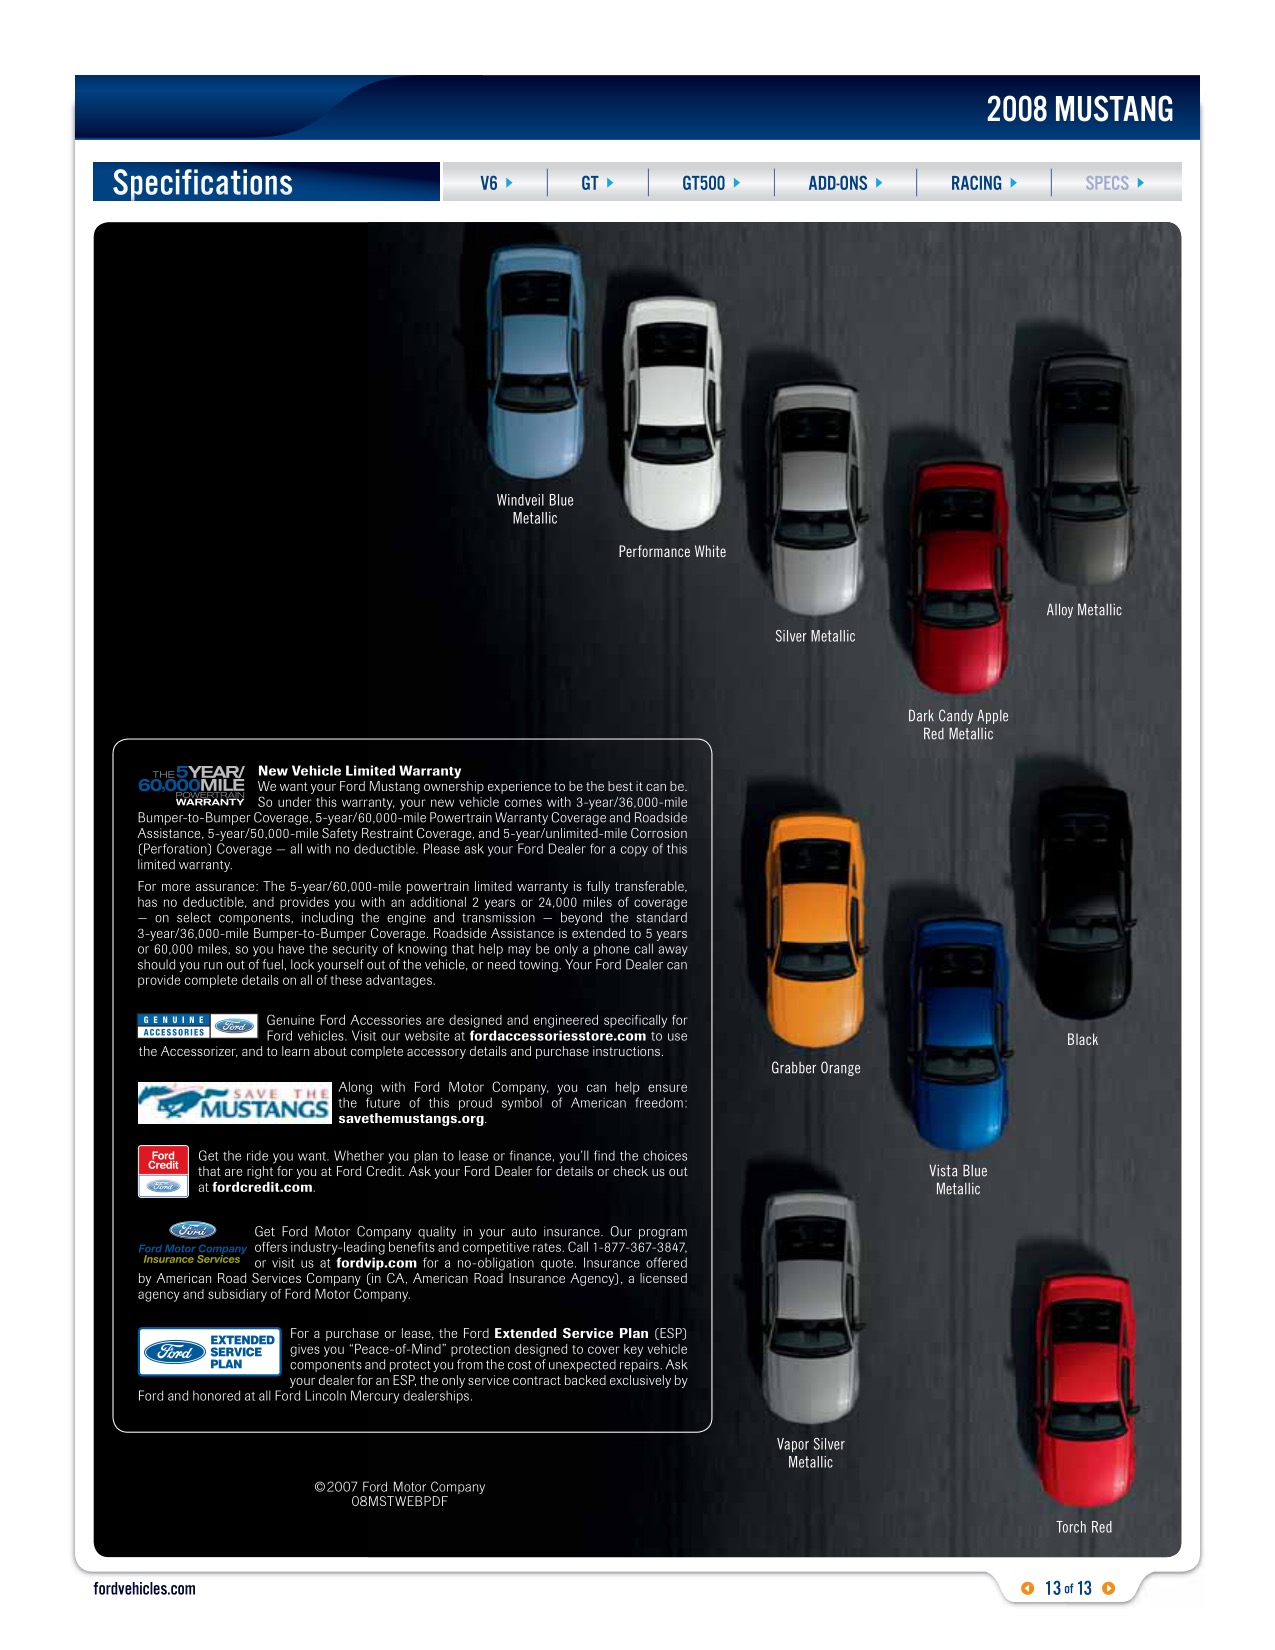 2008 Ford Mustang Brochure Page 5